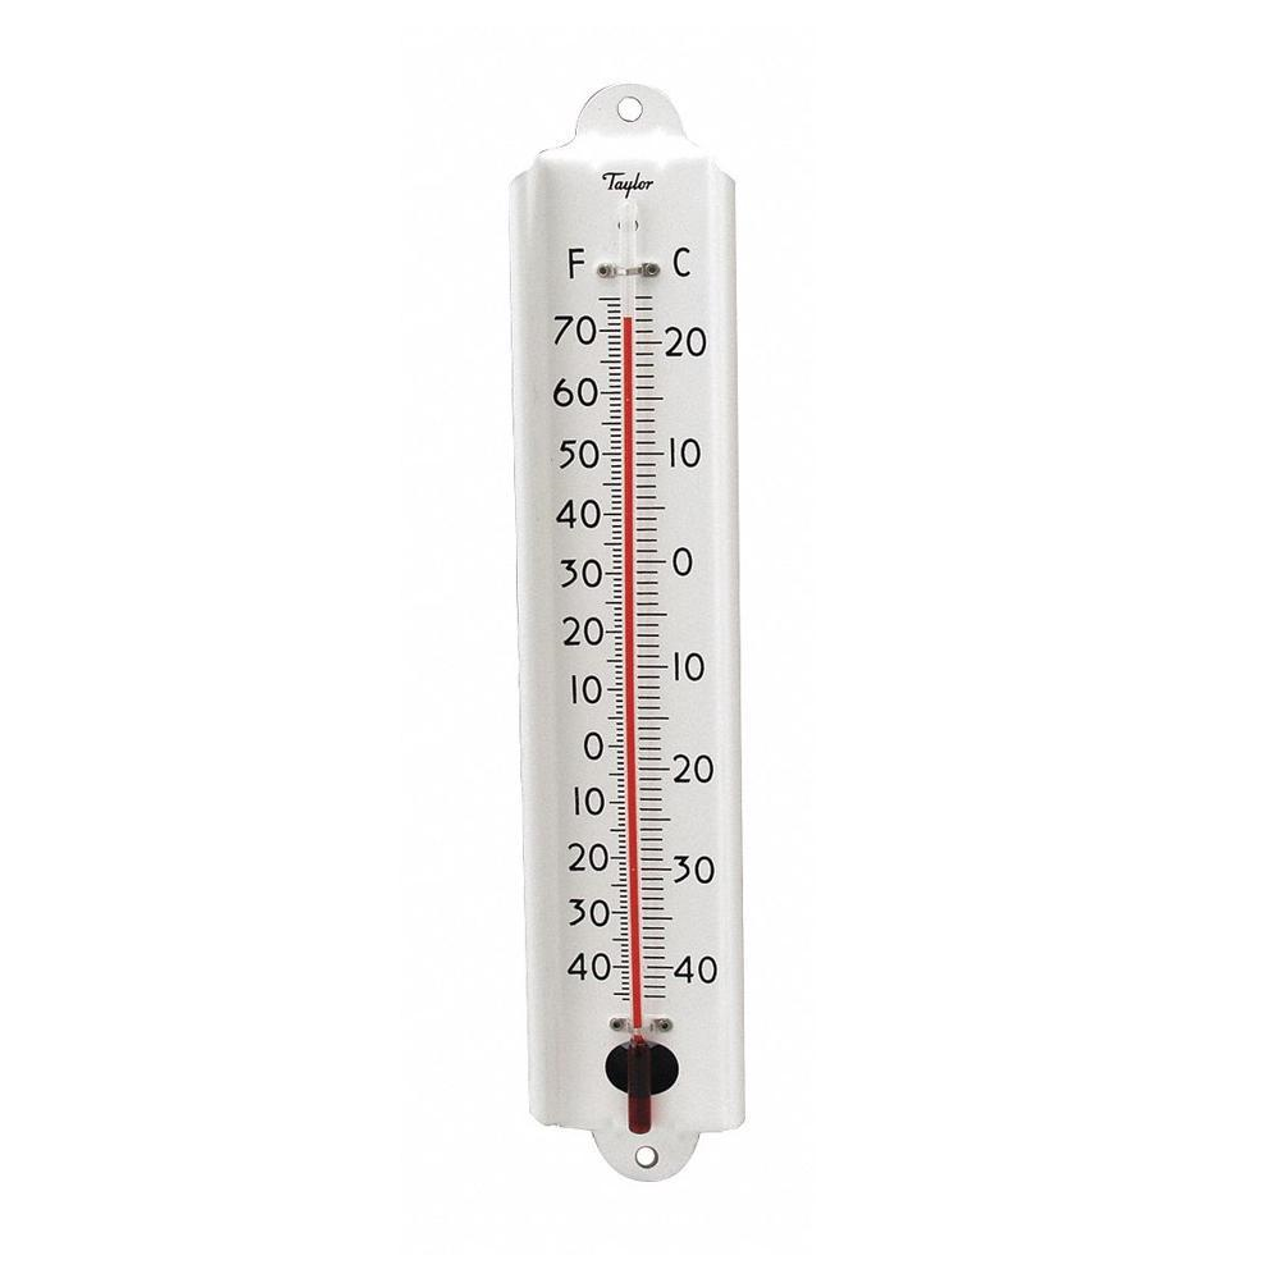 https://cdn11.bigcommerce.com/s-ynkbm3qo/images/stencil/1280x1280/products/3296/12729/2002004-1106-Thermometer-Low-Res-PNG-1000p-x-1000p__14863.1703082887.png?c=2